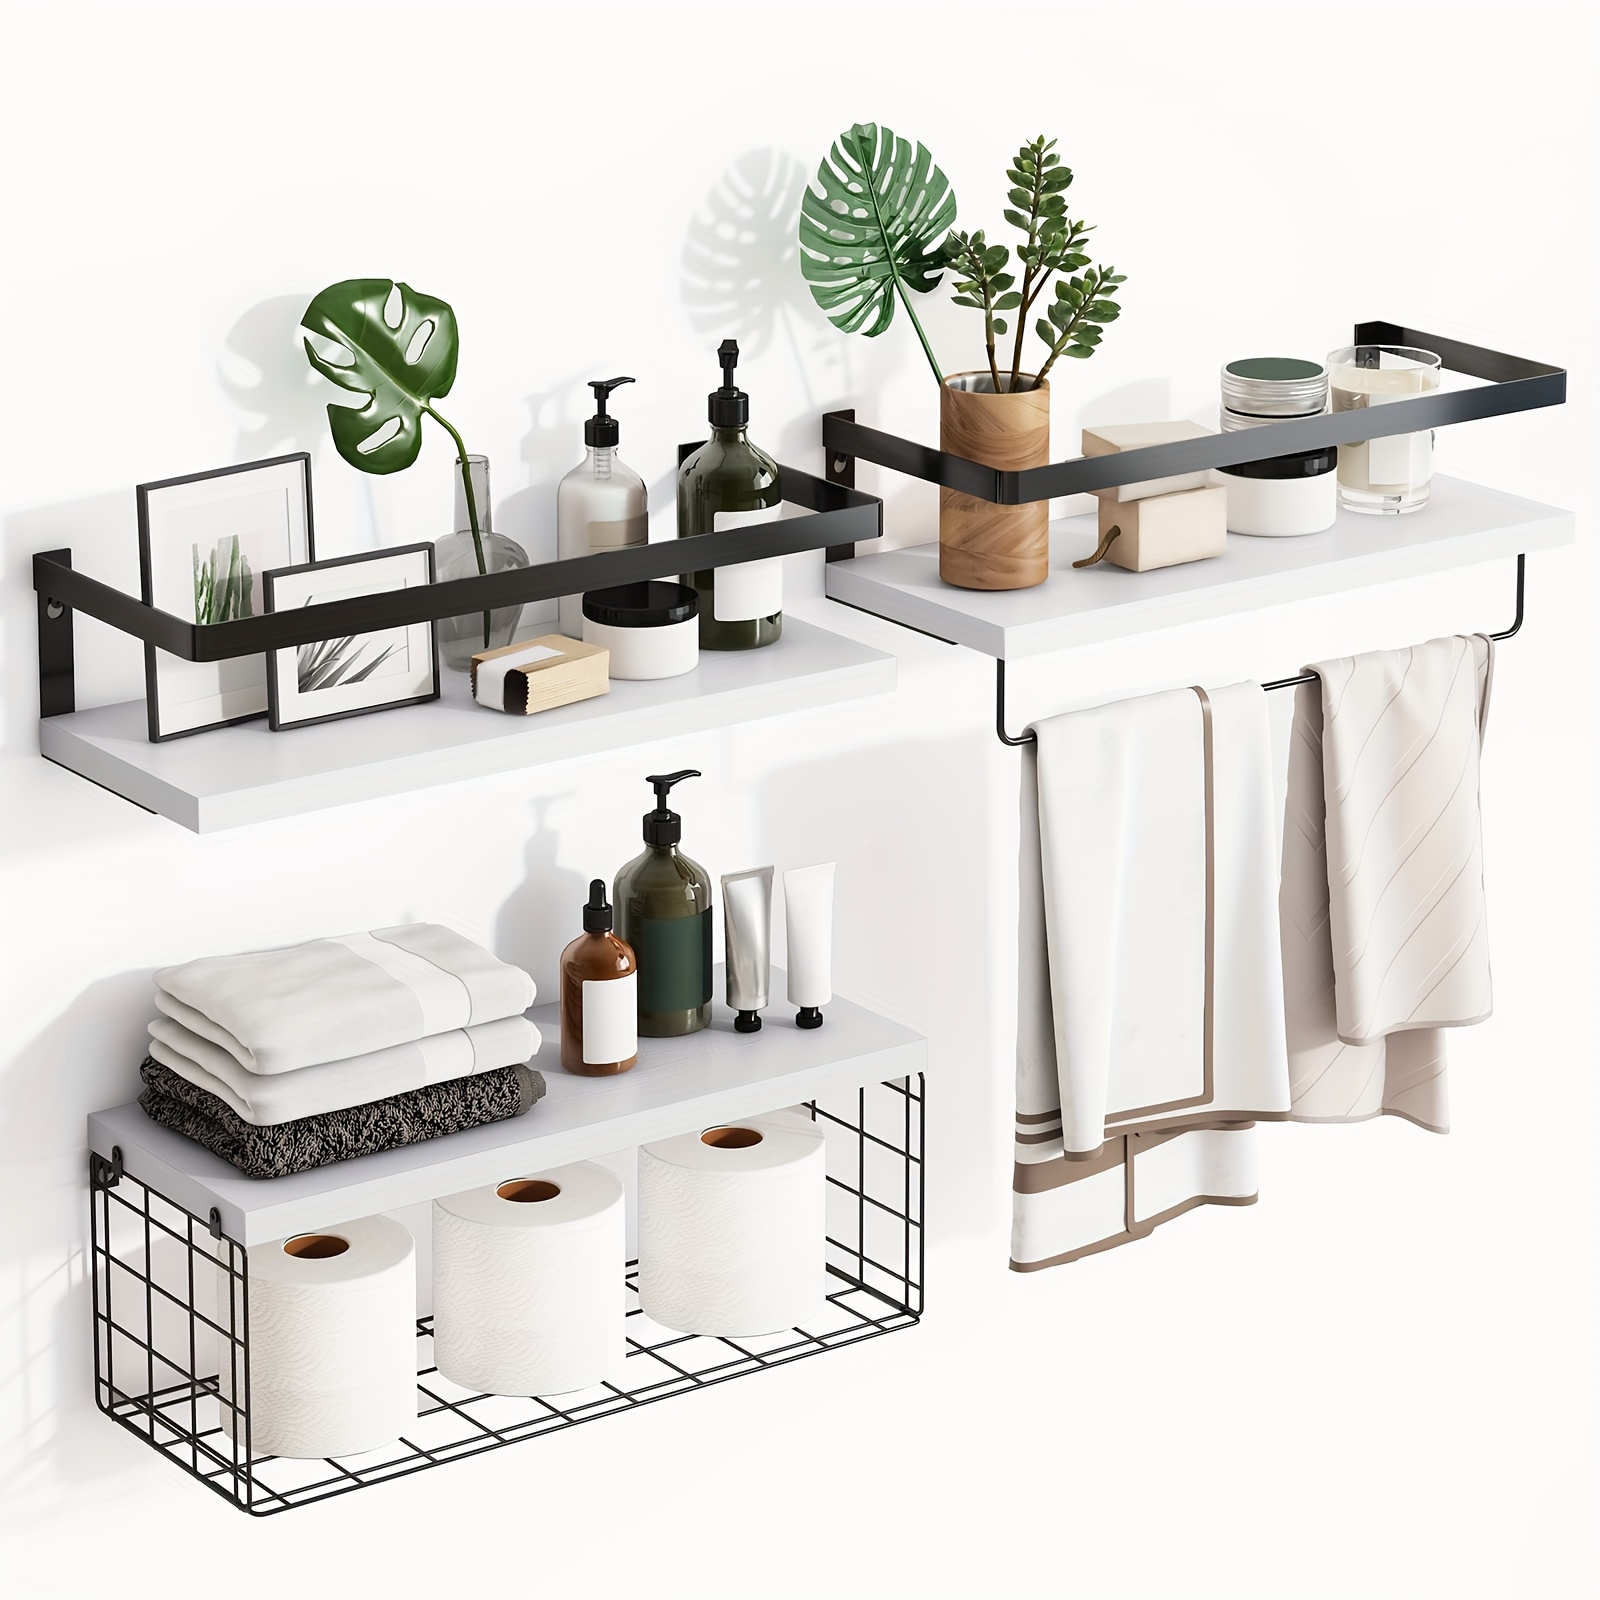 

3+1 Tier Wall Mounted Floating Shelves With Metal Frame, Bathroom Shelves Over Toilet With Wire Storage Basket, Meet Your Decoration And Organization Needs, For Bathroom, Kitchen (white)